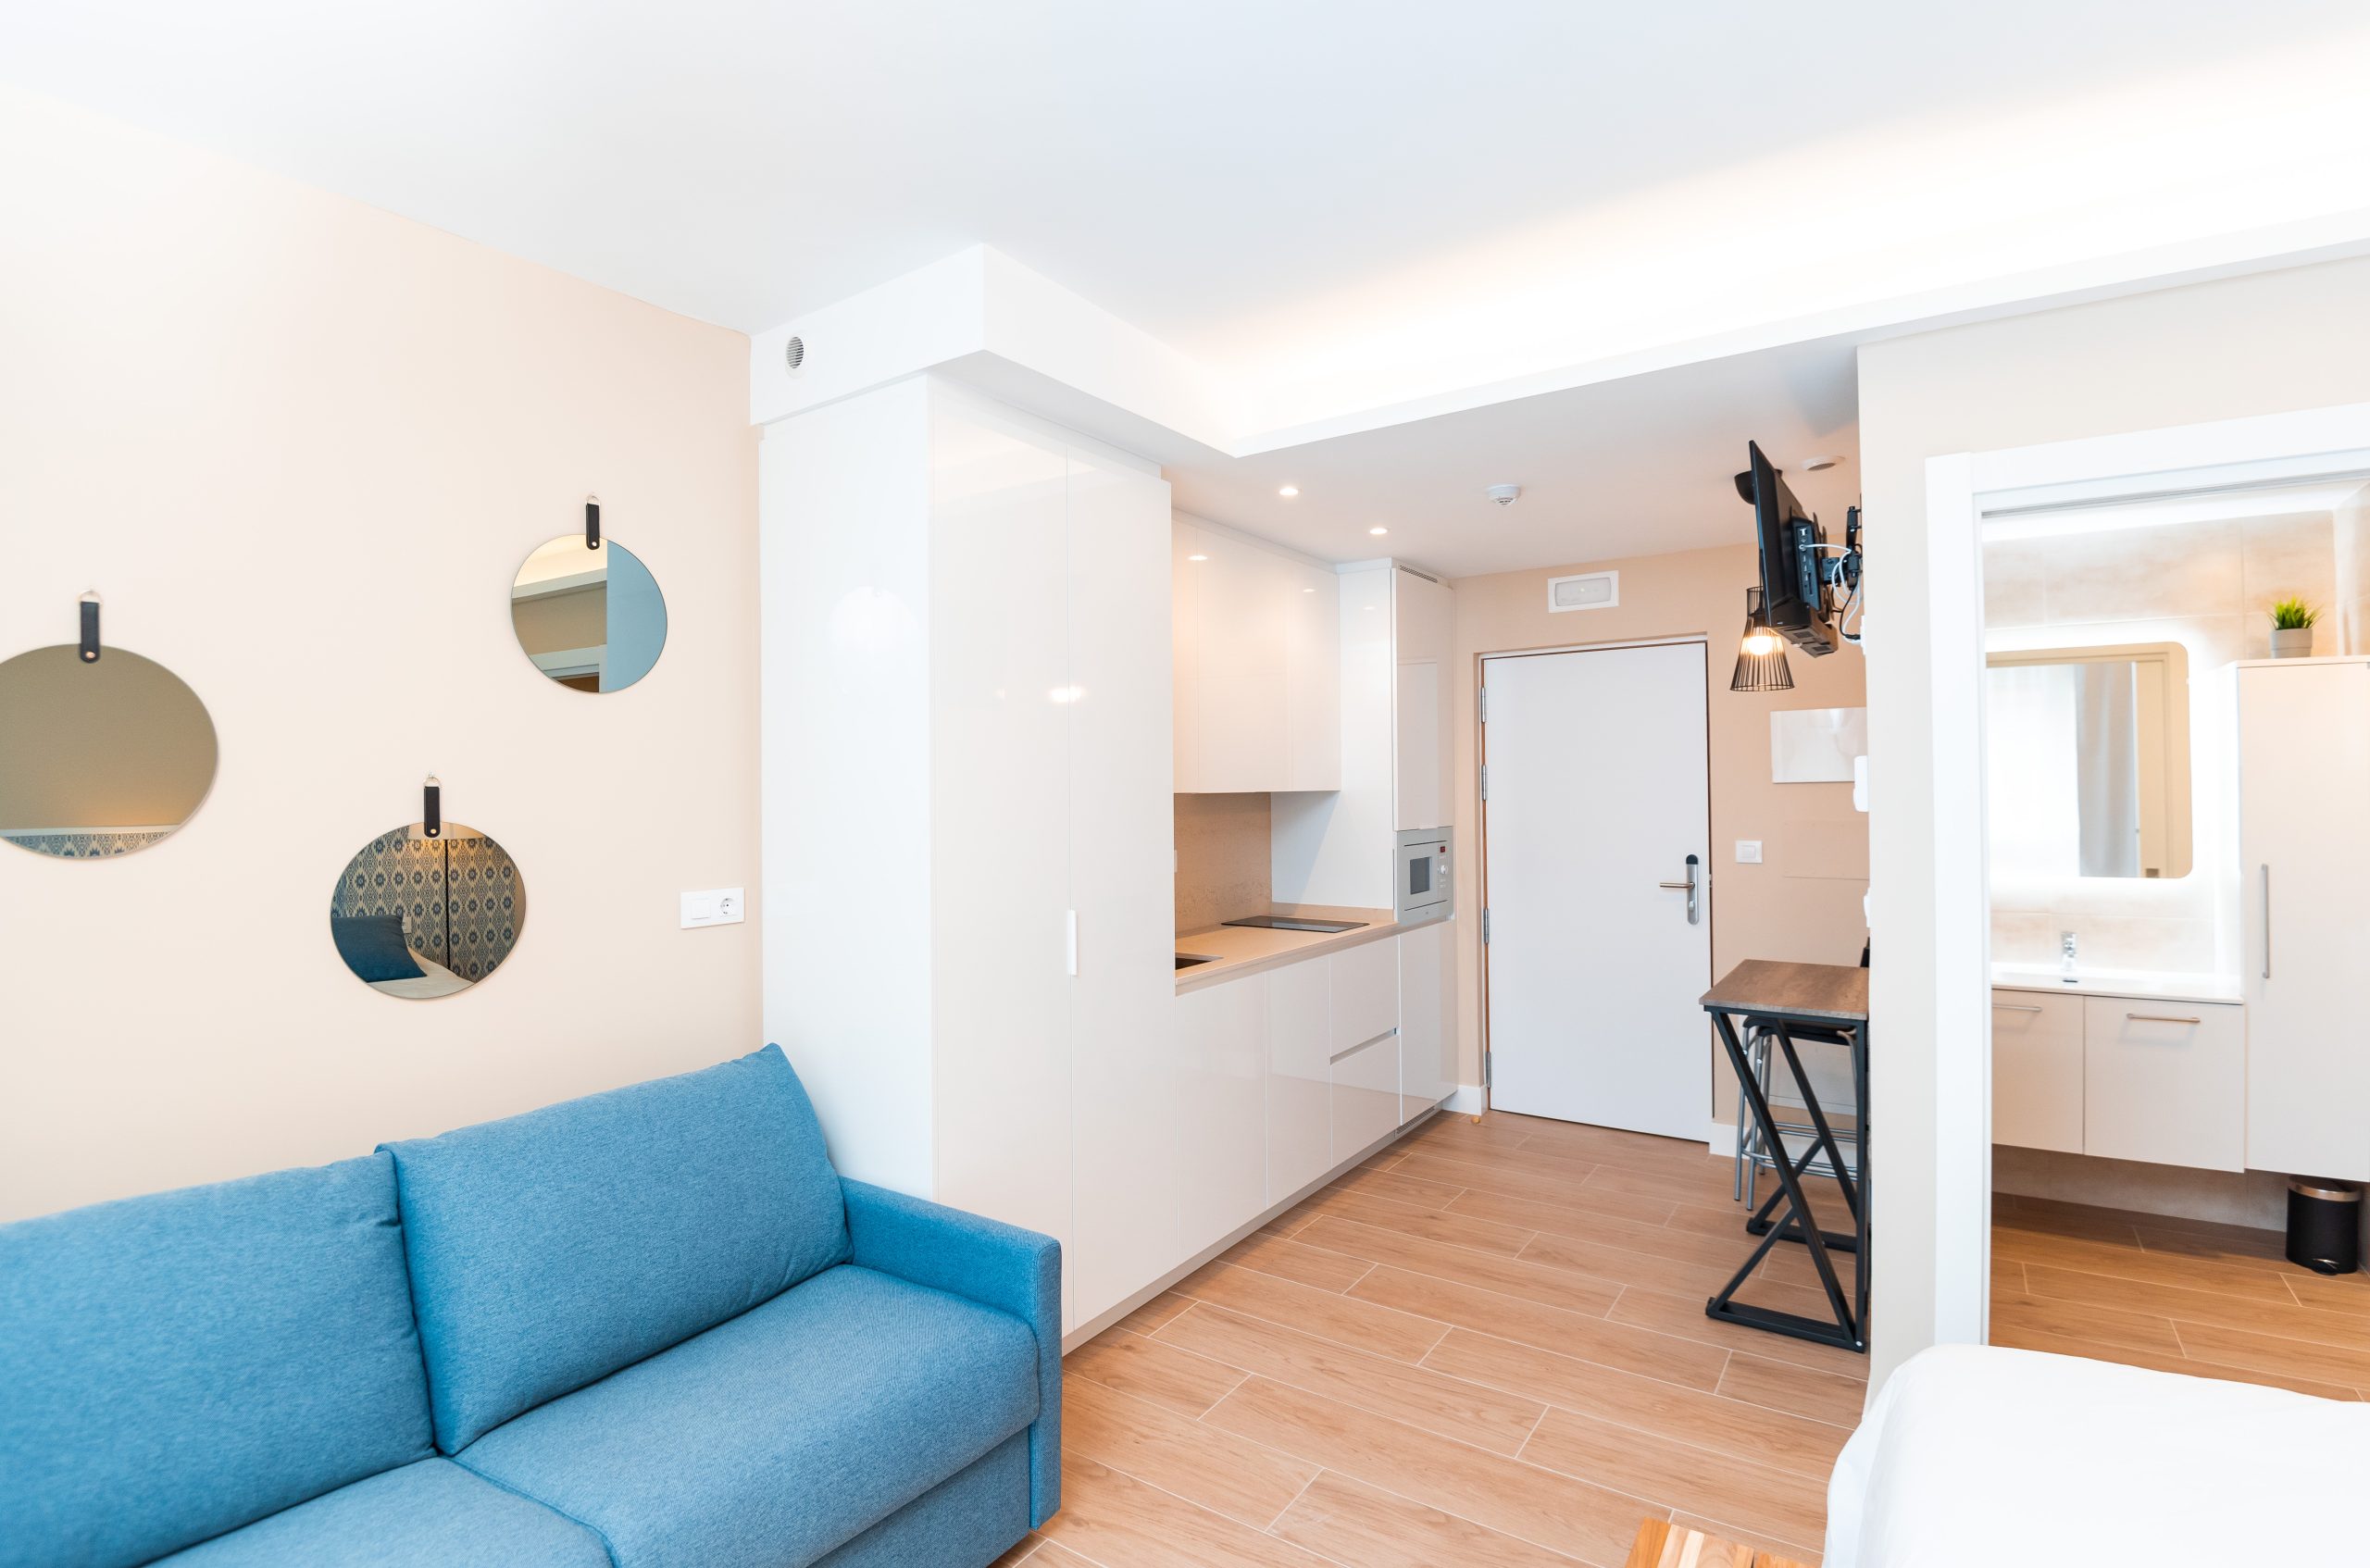 Kai A - Furnished studio for rent in Bilbao